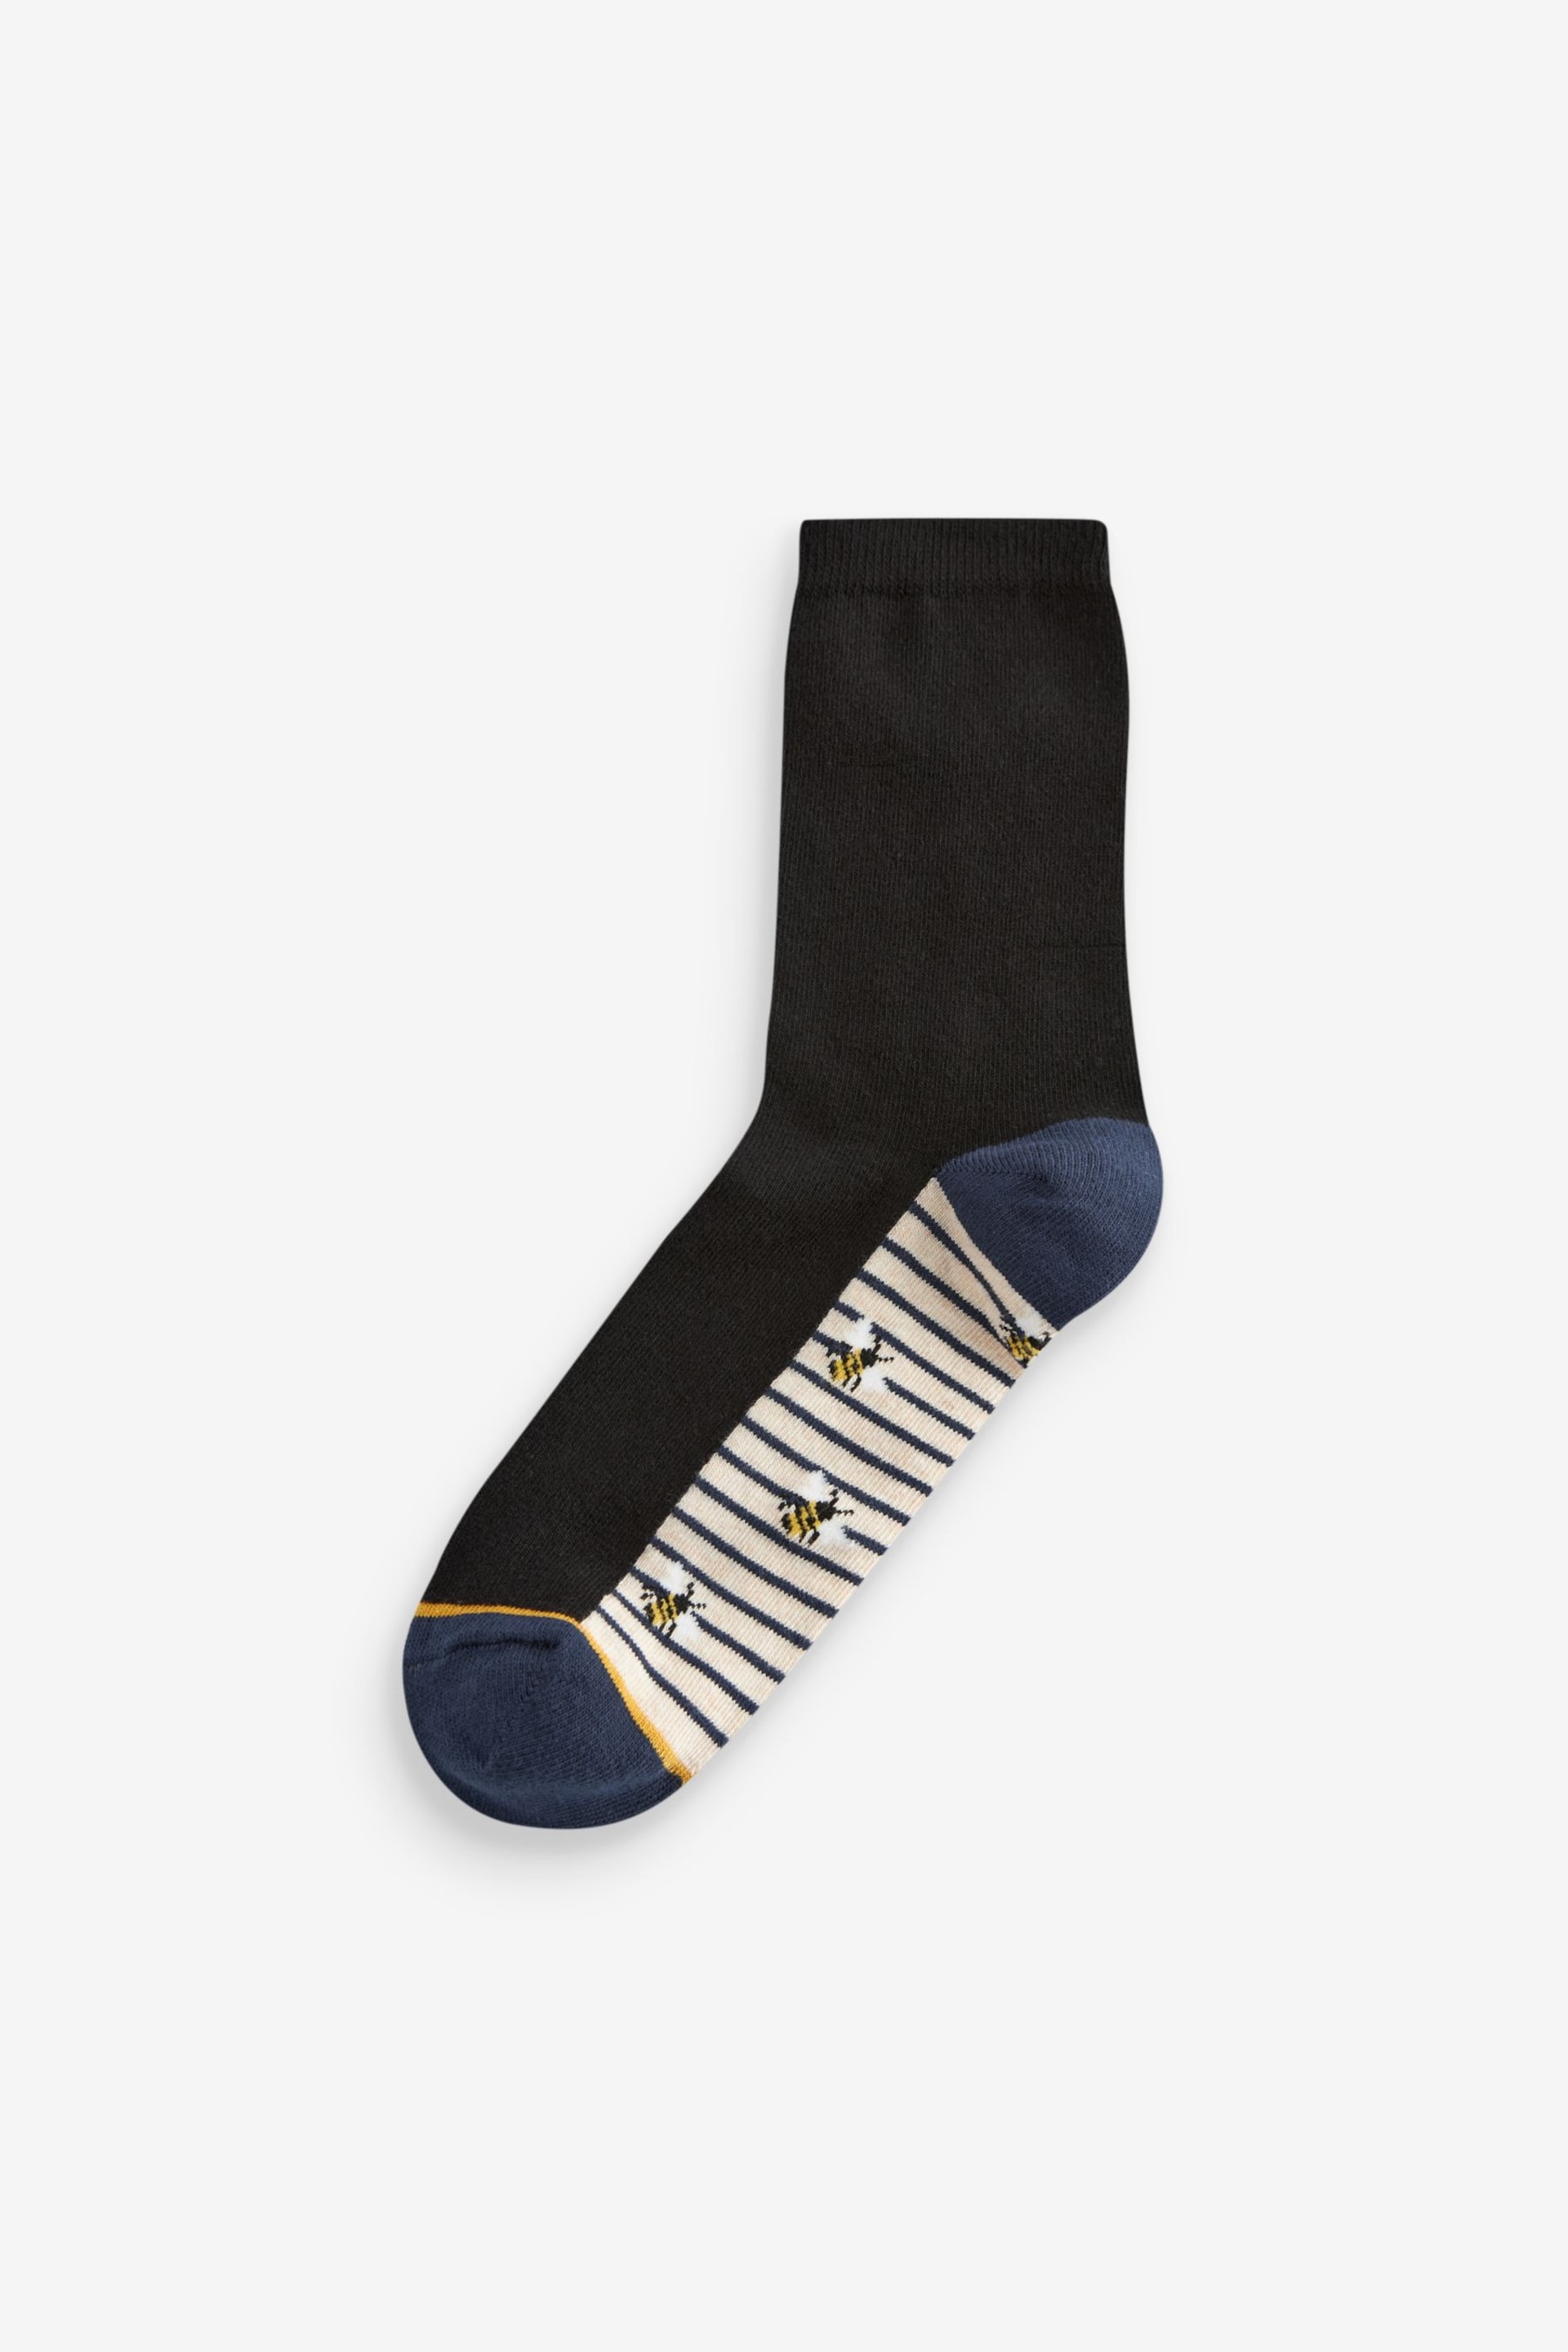 Blue/Ochre Bee Footbed Ankle Socks 5 Pack - Image 3 of 6